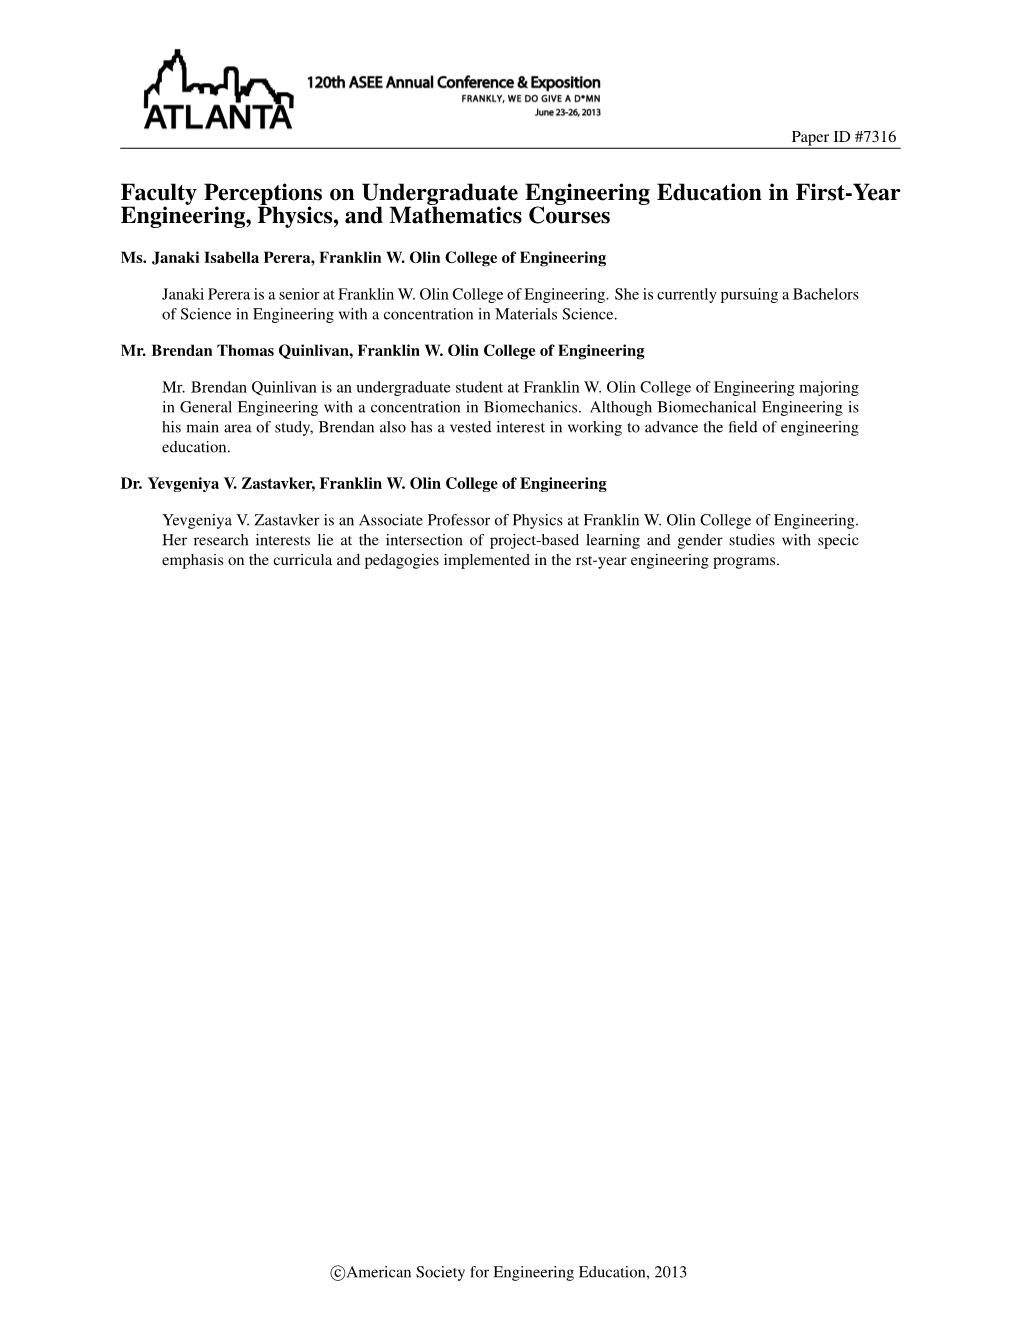 Faculty Perceptions on Undergraduate Engineering Education in First-Year Engineering, Physics, and Mathematics Courses